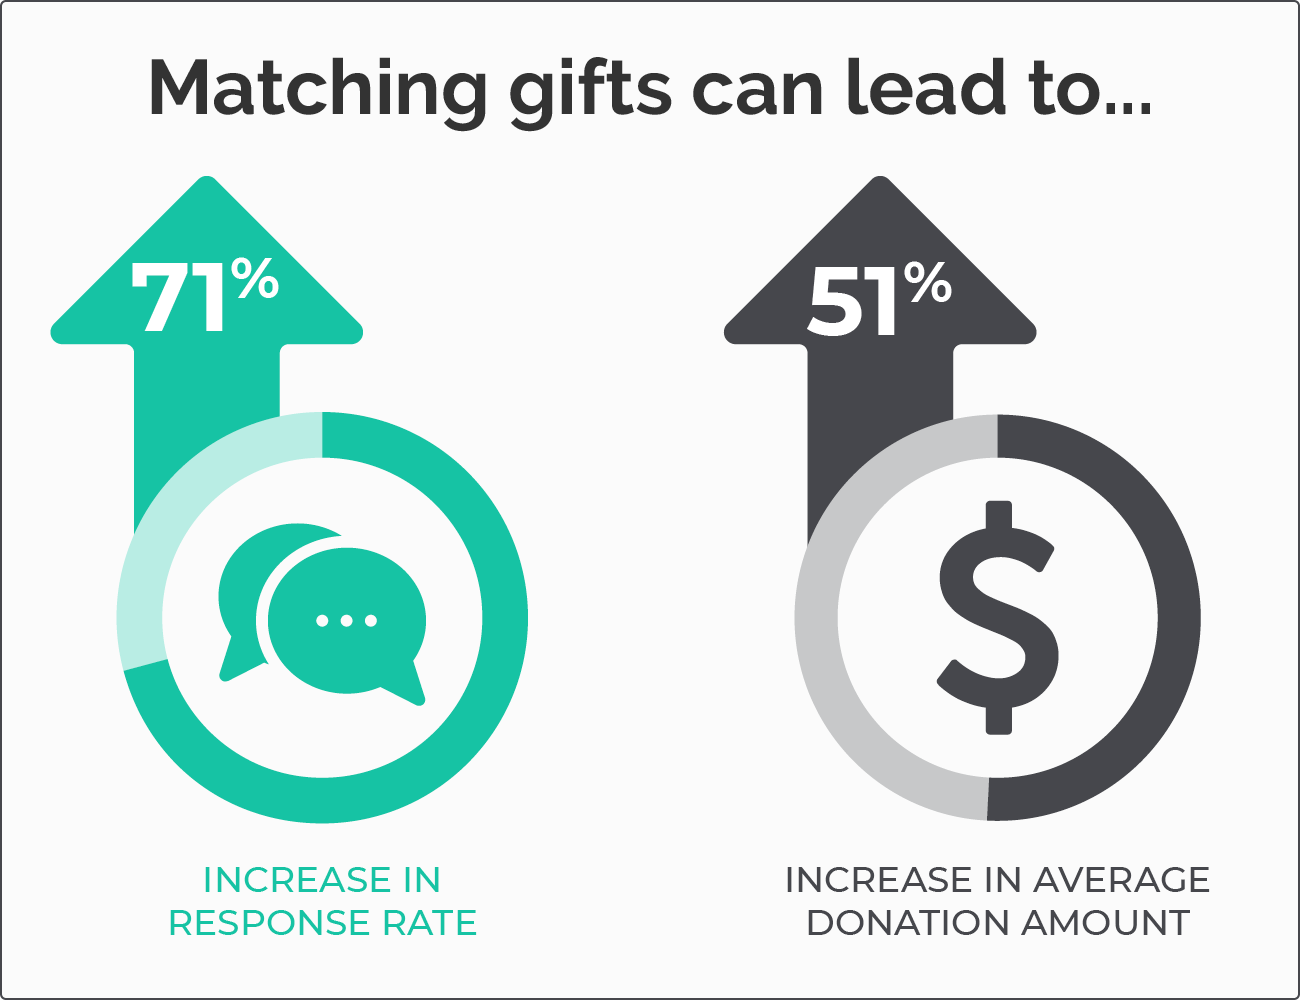 Matching gift stats for 360MatchPro by Double the Donation